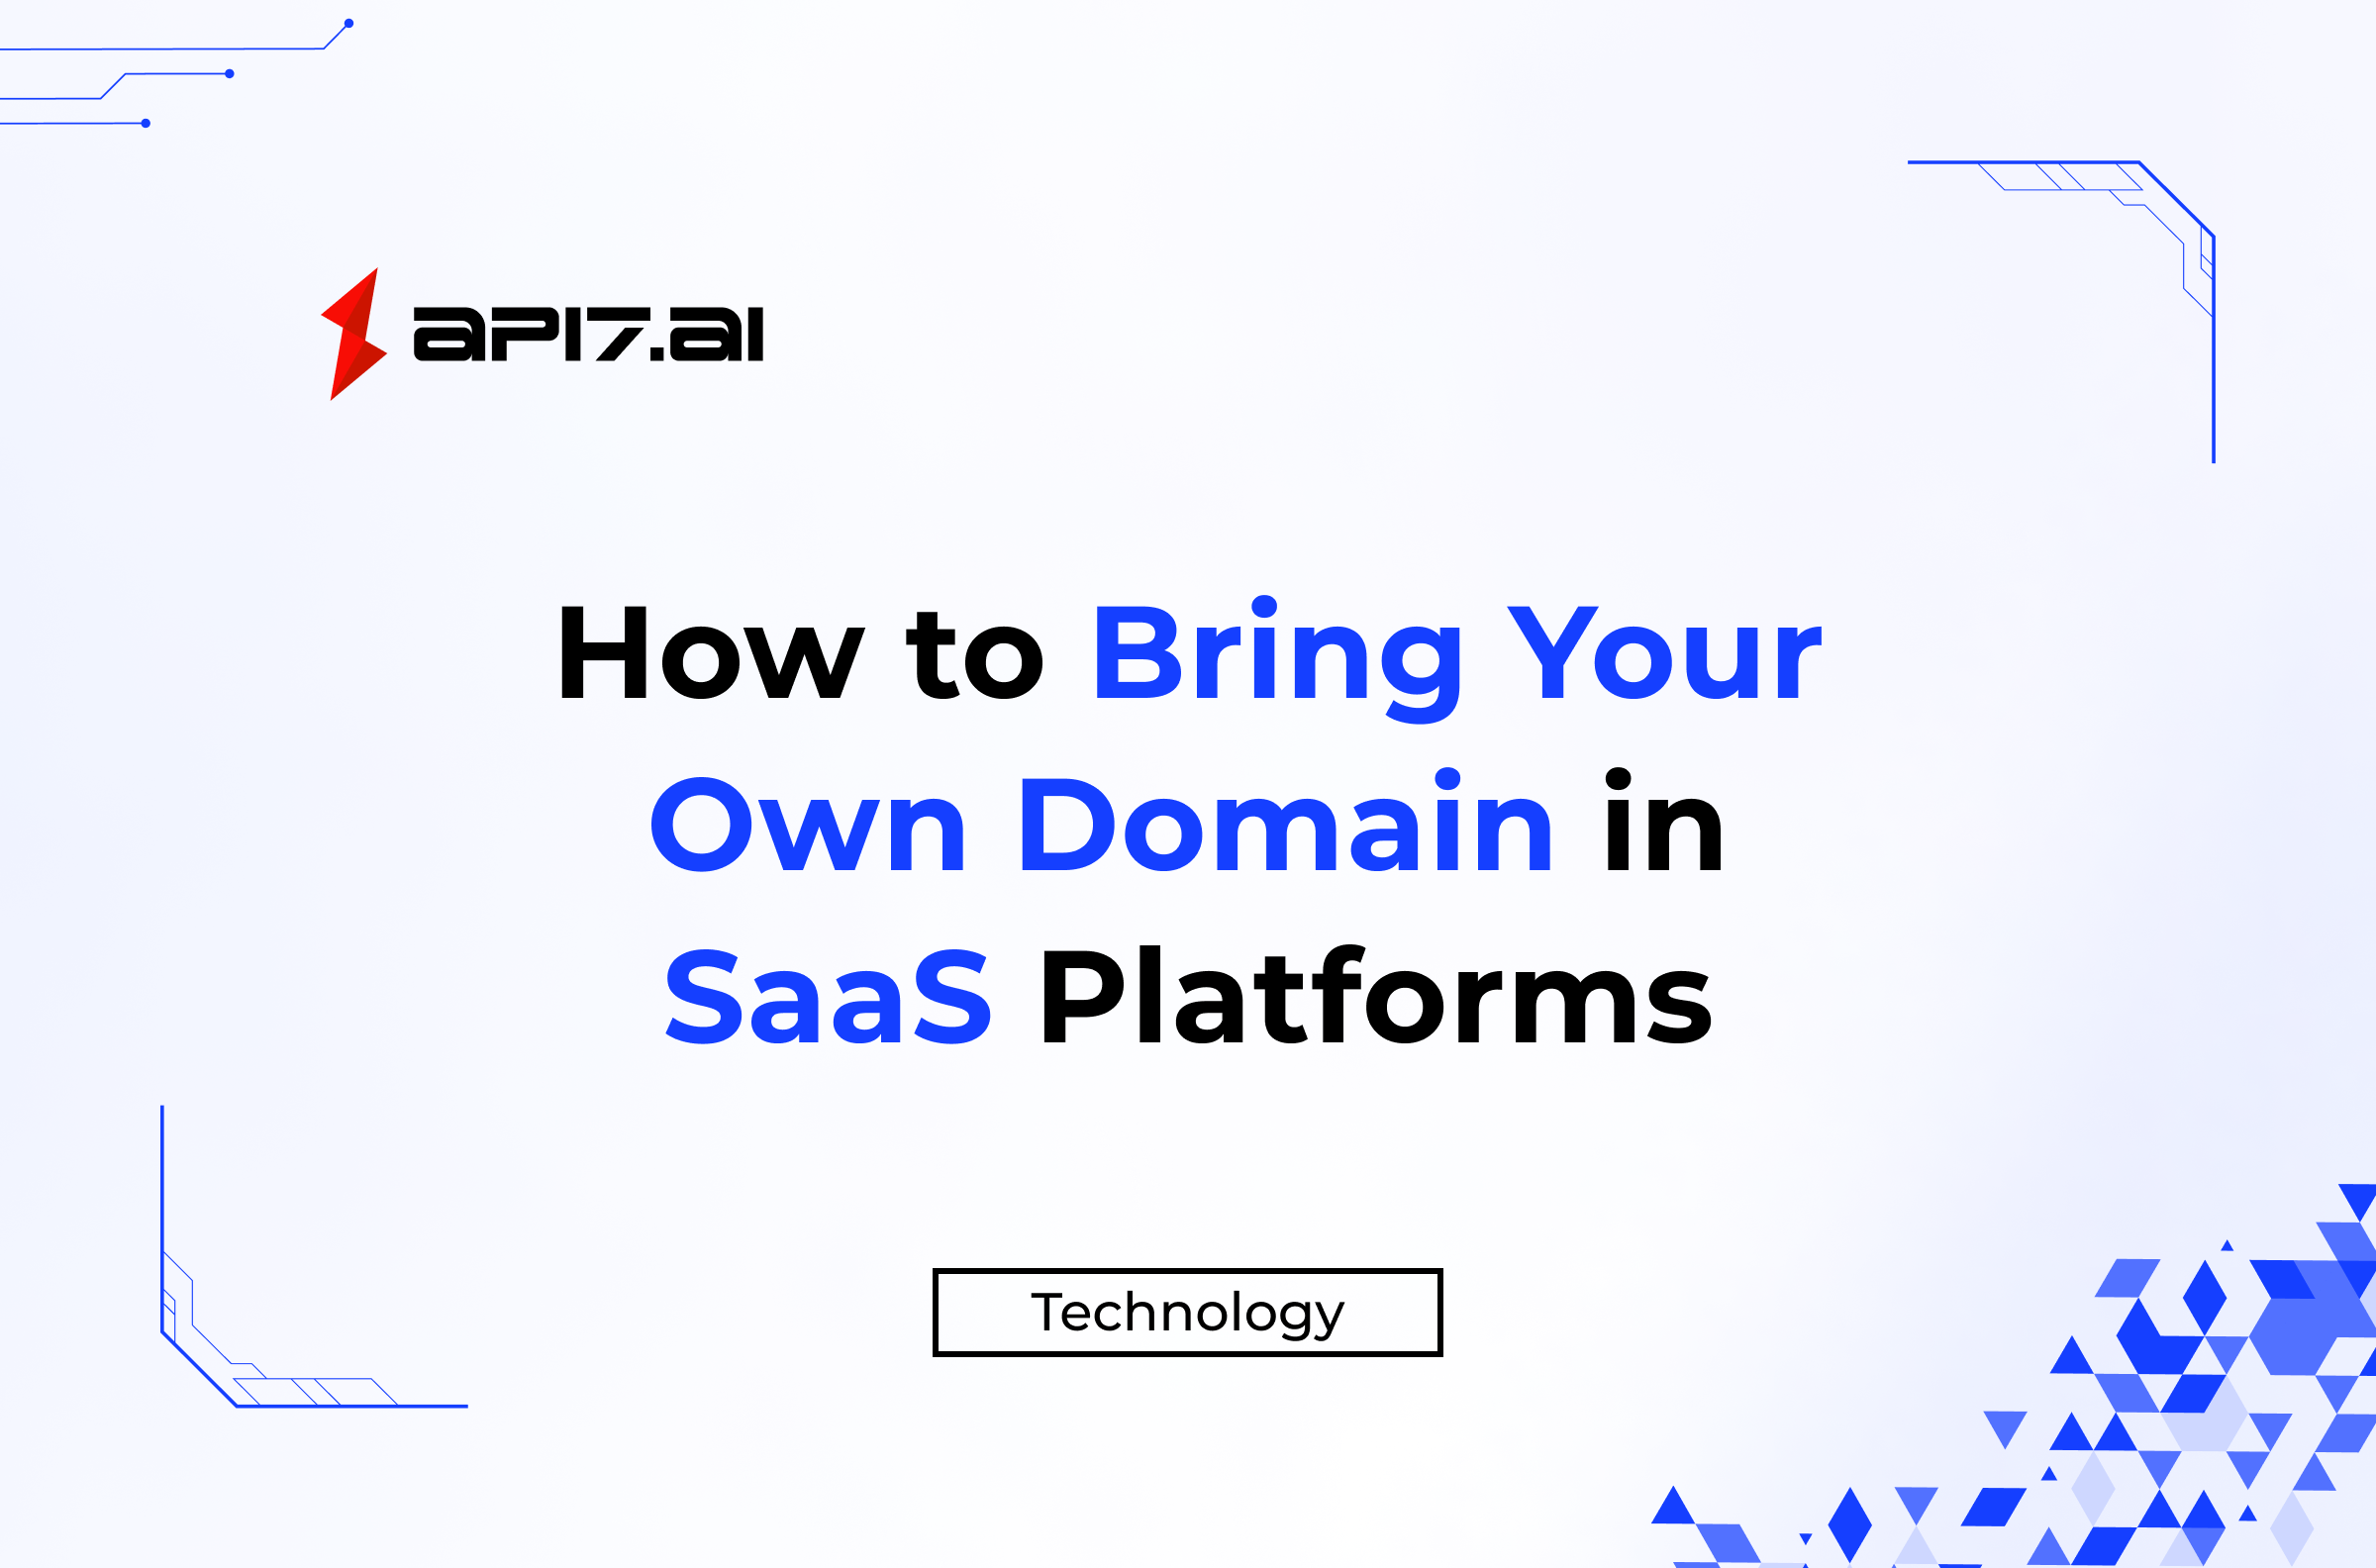 How to Bring Your Own Domain in SaaS Platforms?